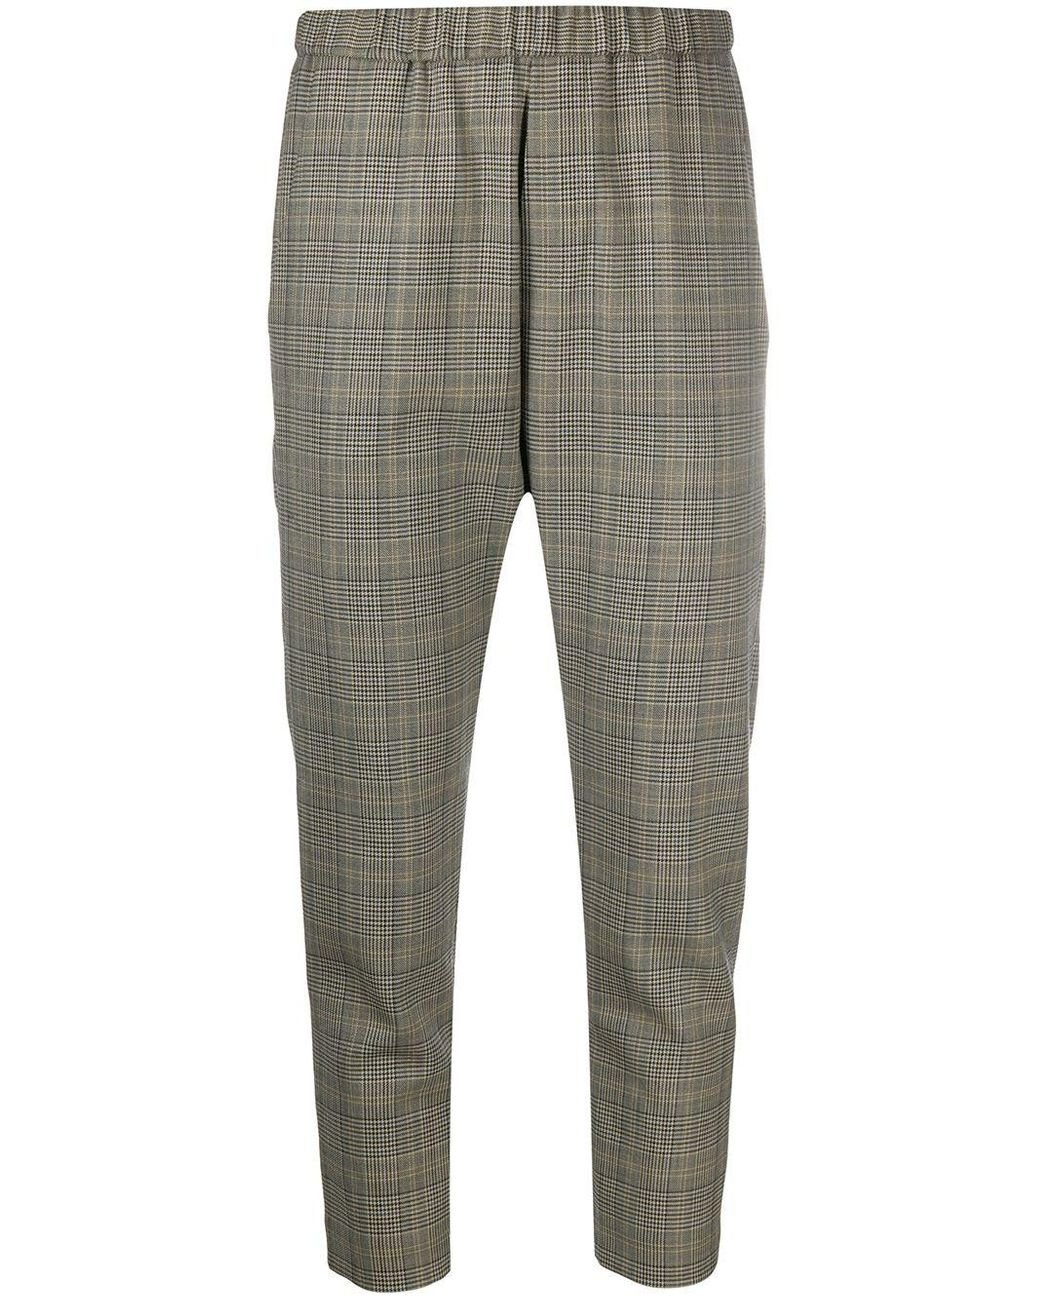 Nili Lotan Wool Plaid Cropped Trousers in Brown - Lyst